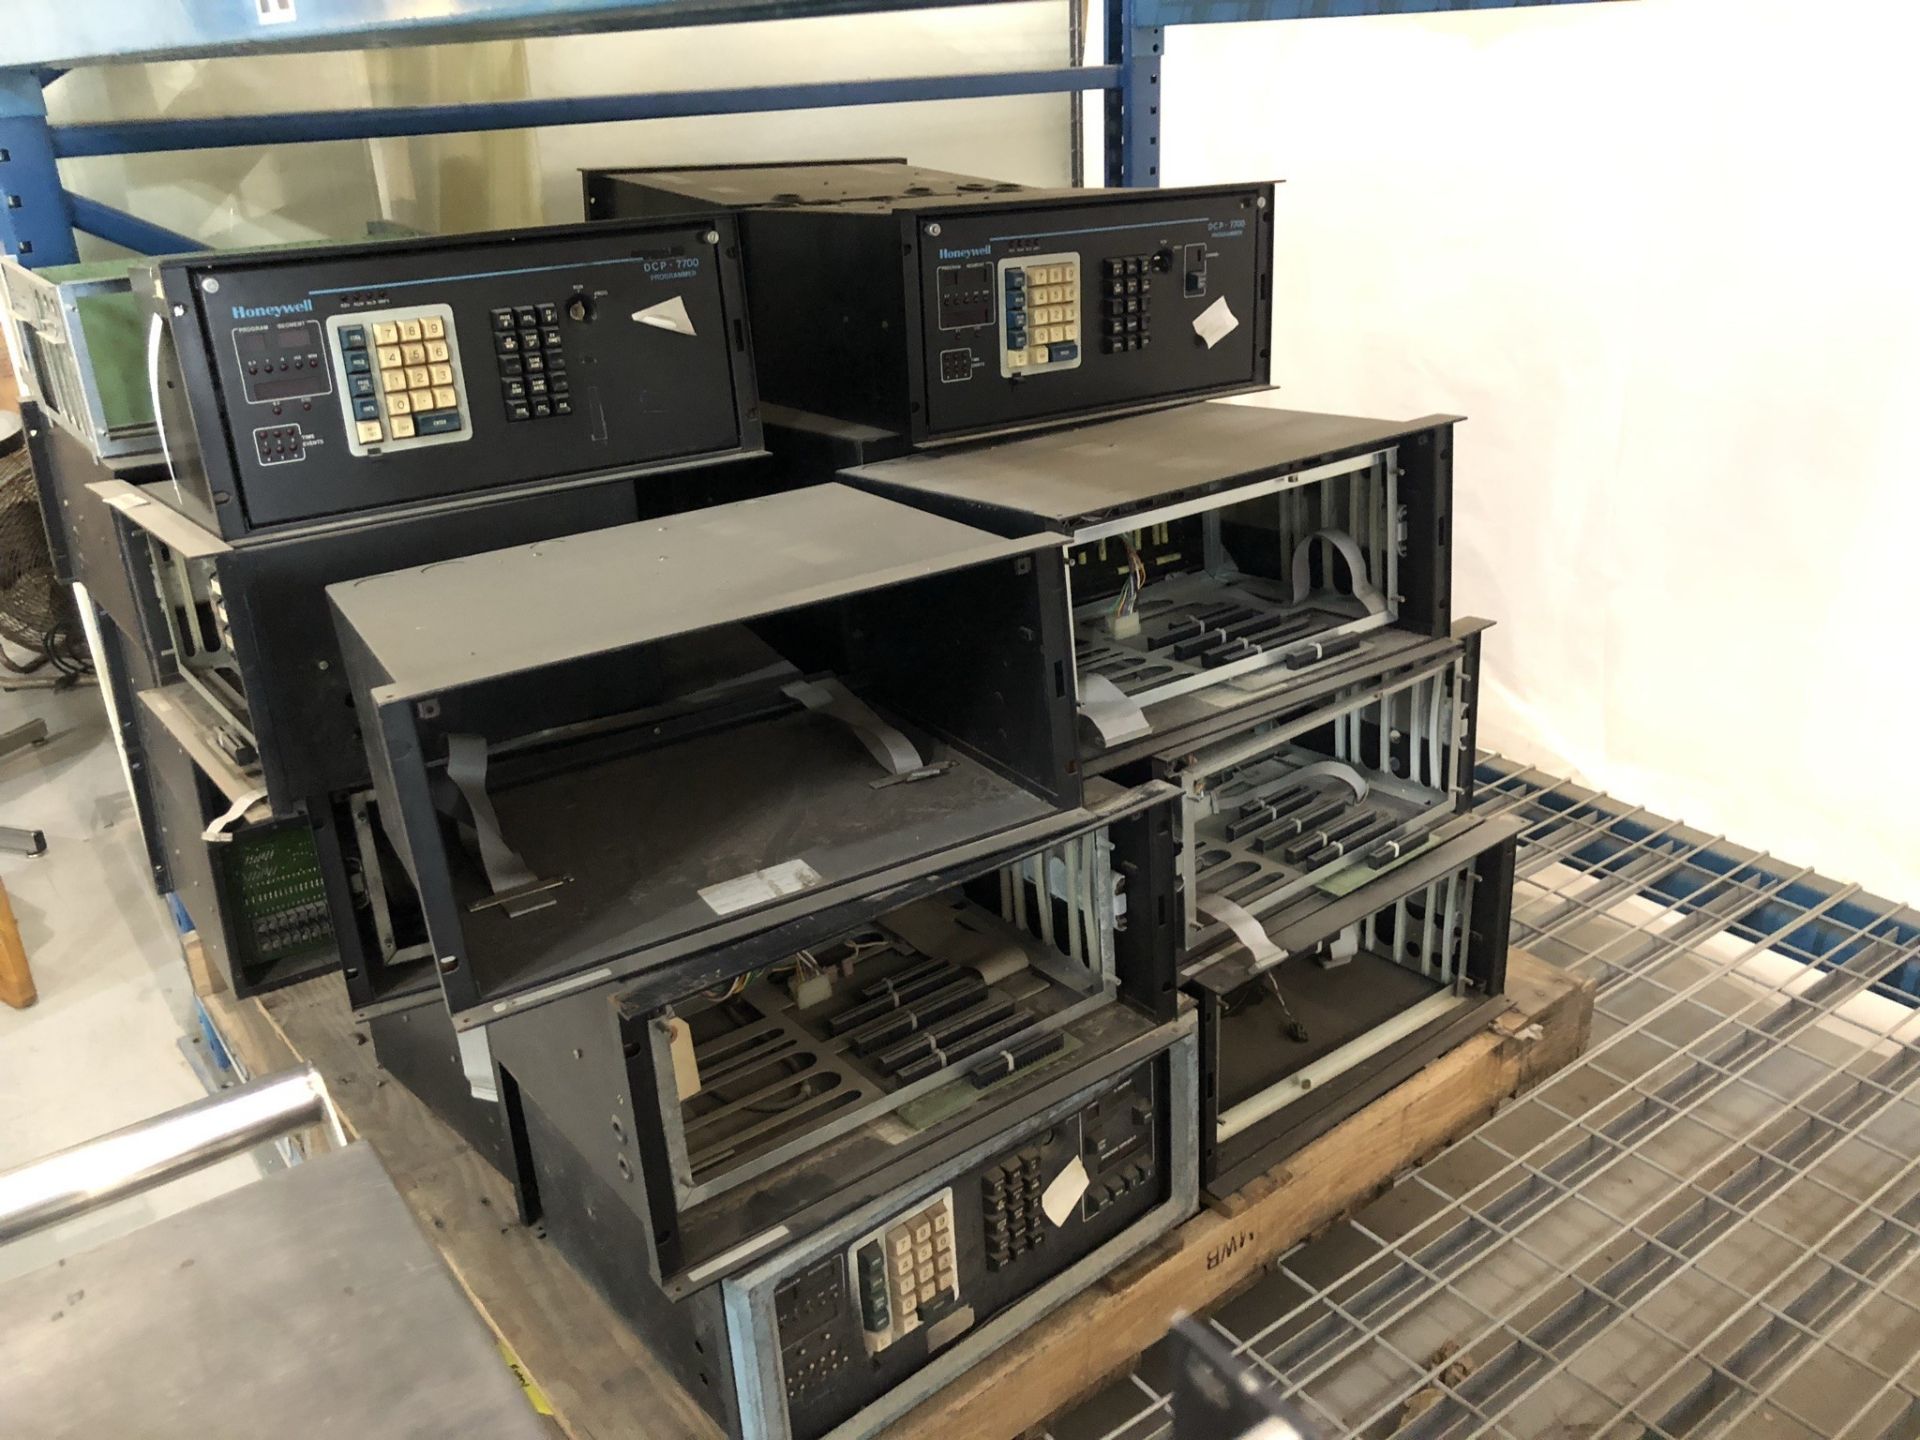 Lot of used Honeywell DCP 7700 microprocessor based furnace control systems. - Image 2 of 3